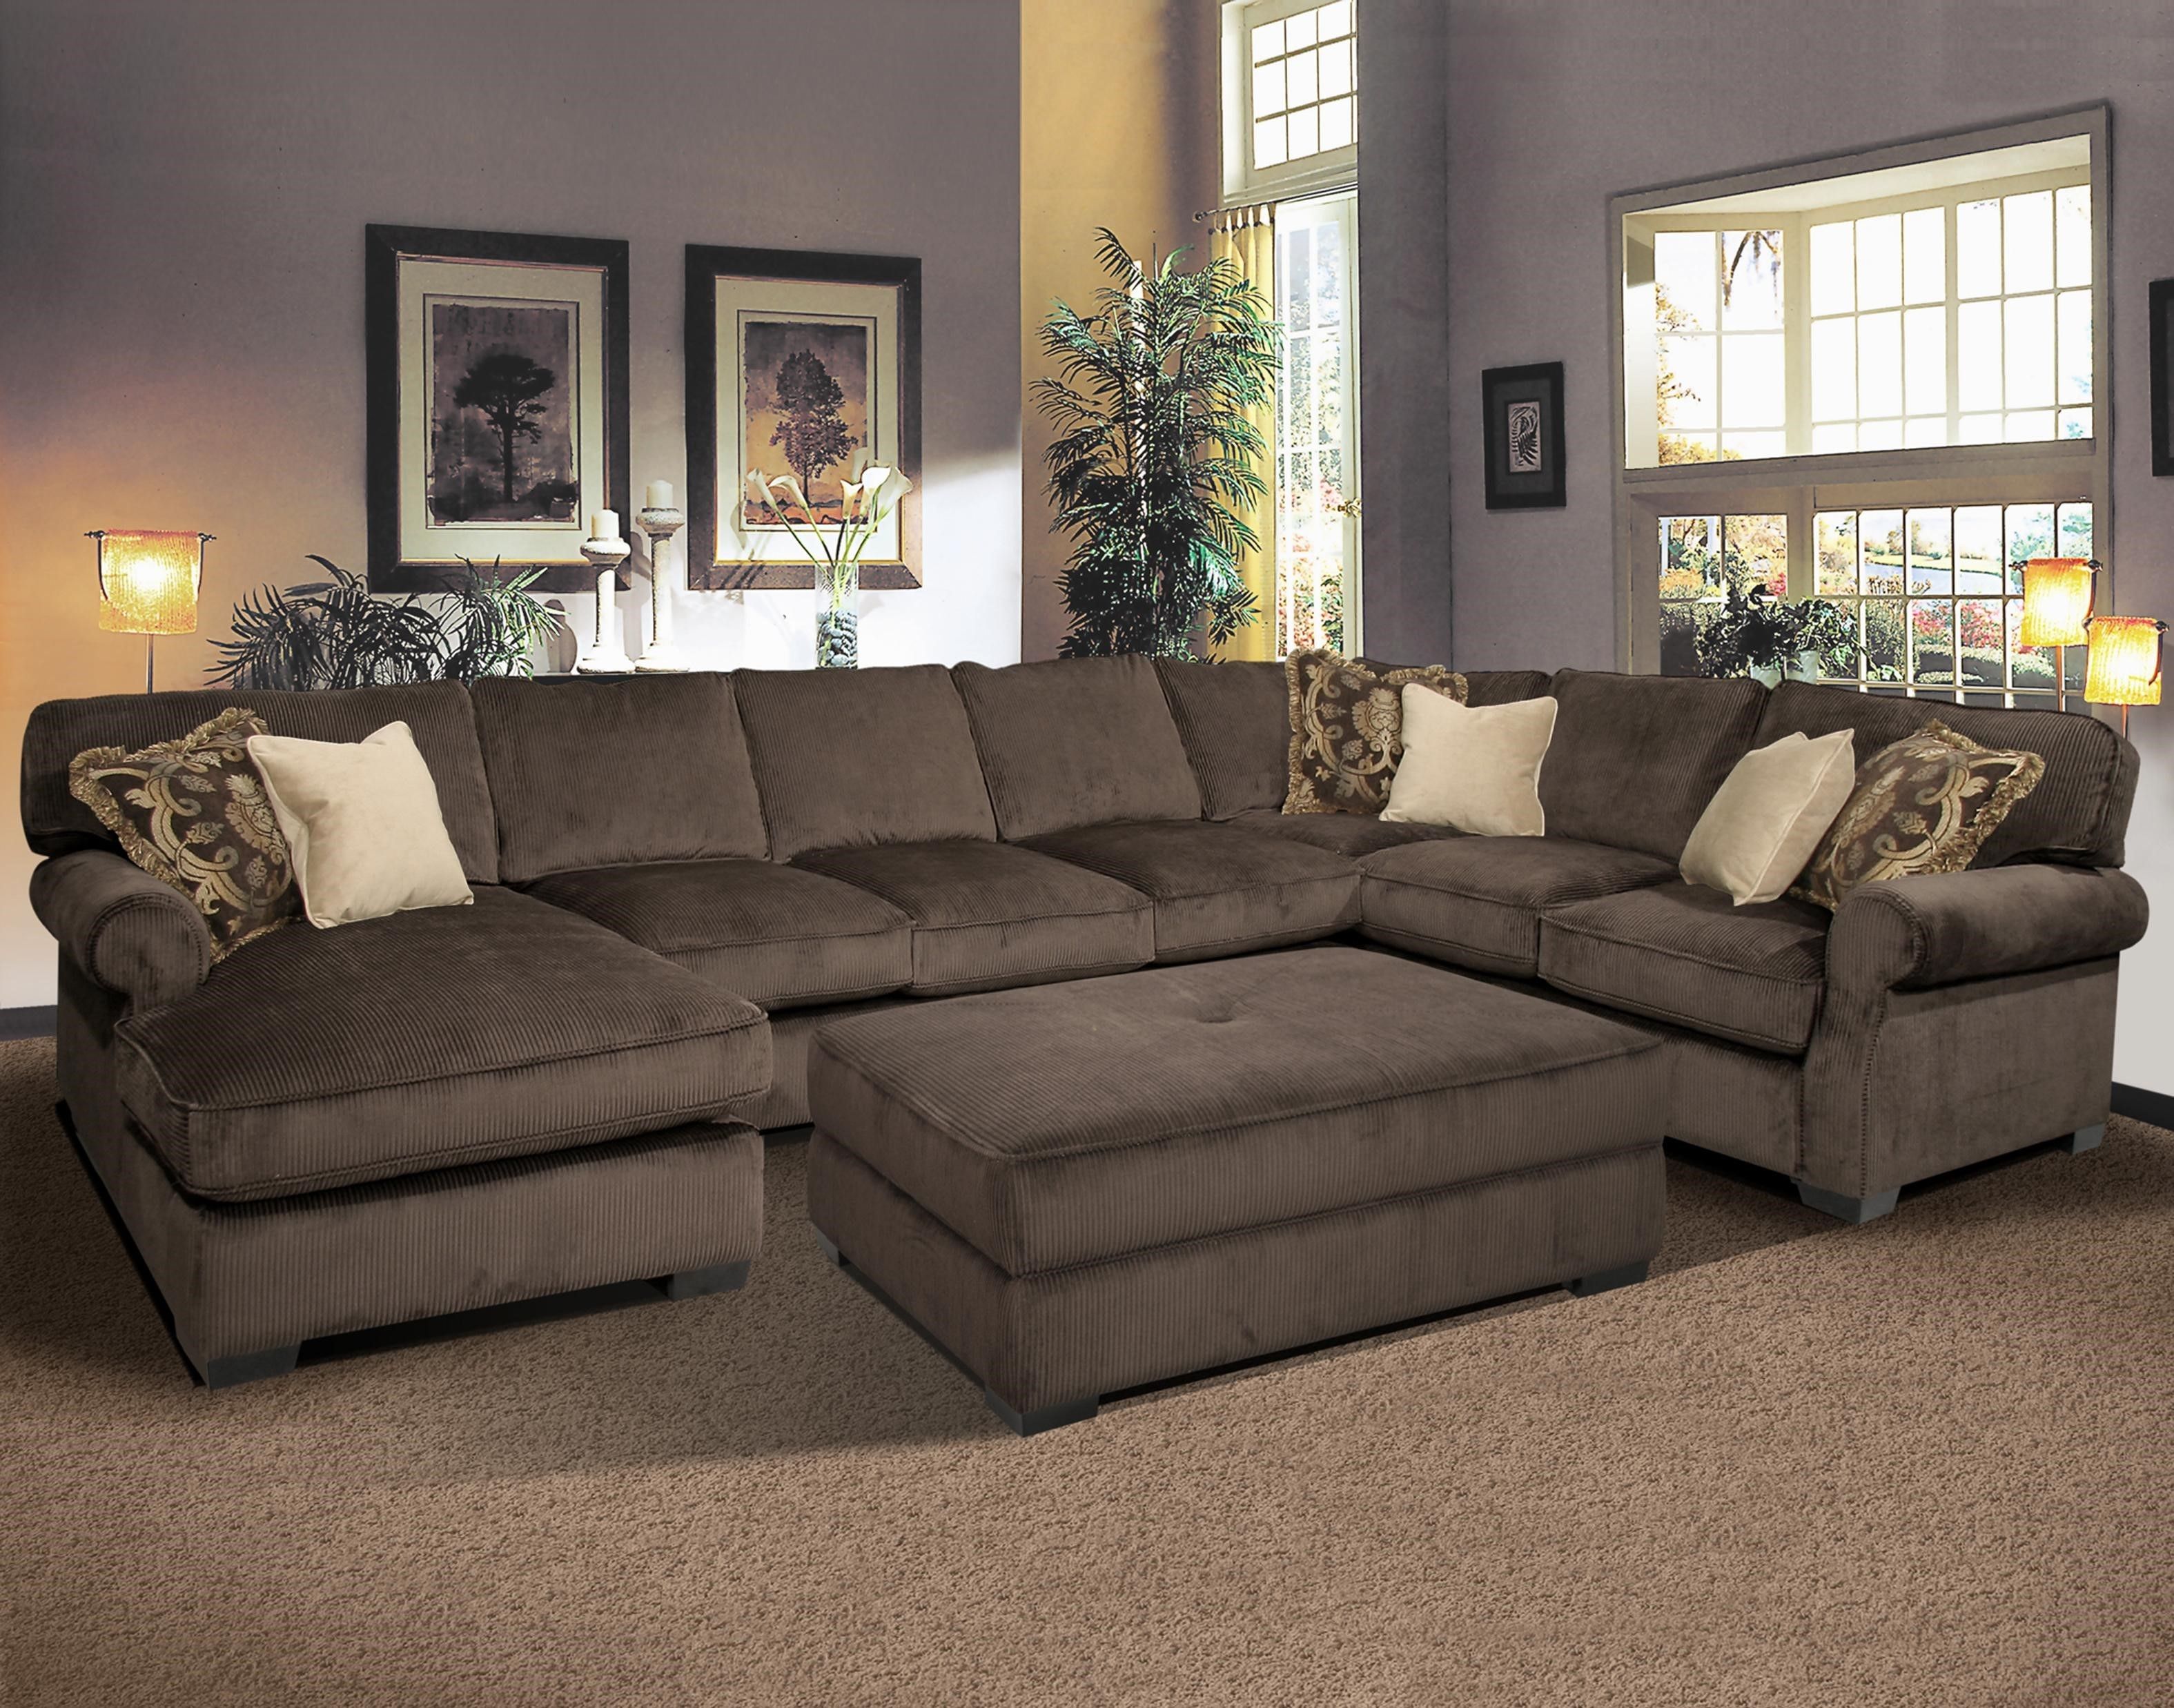 Furniture: Harbor Freight Furniture | Sectional Sofas Under 300 Inside Tallahassee Sectional Sofas (View 2 of 10)